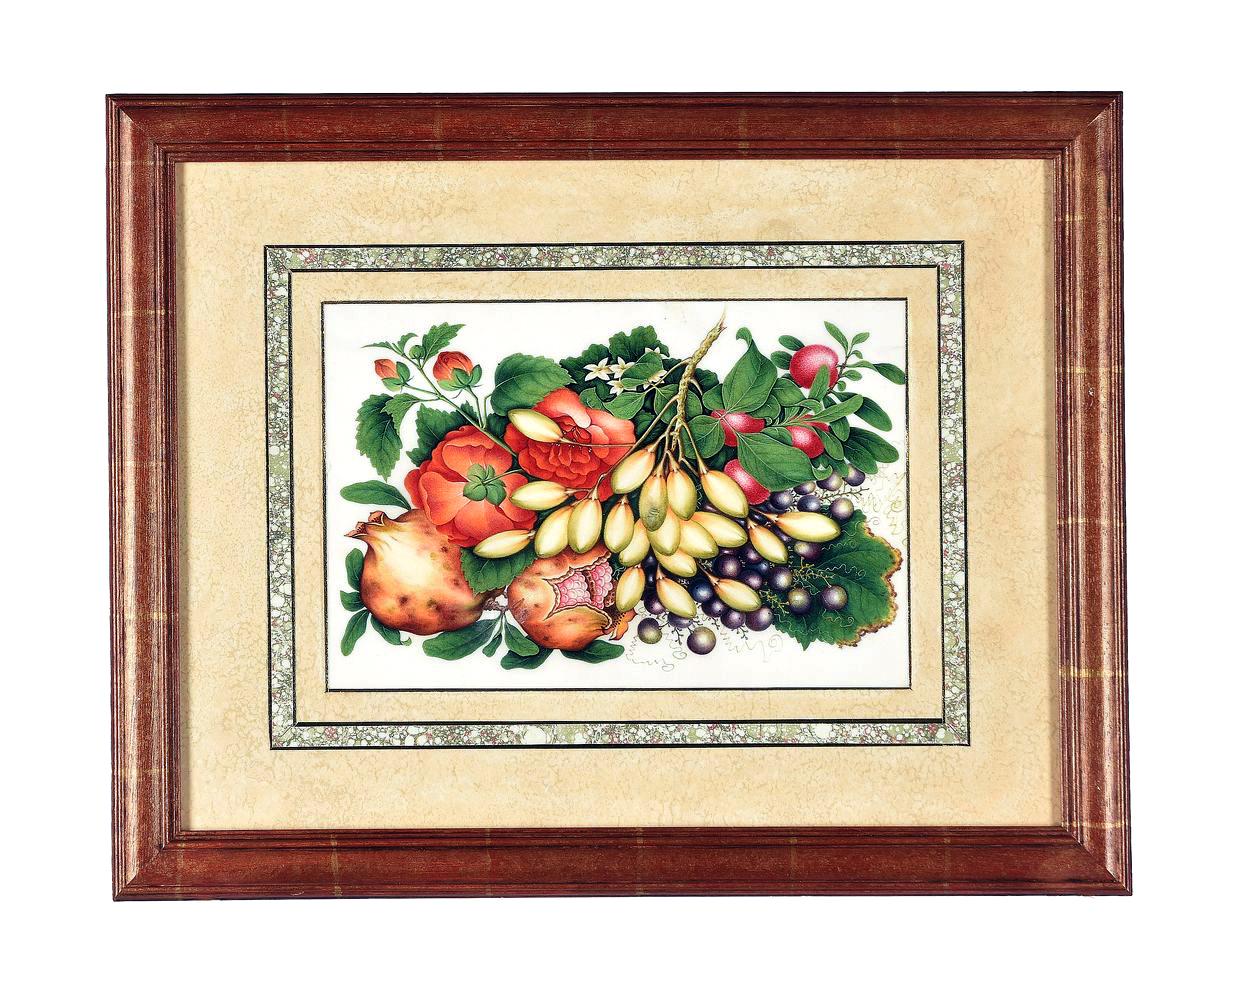 China Trade Watercolor & Gouache Set of Twelve Paintings of Fruit & Flowers For Sale 3